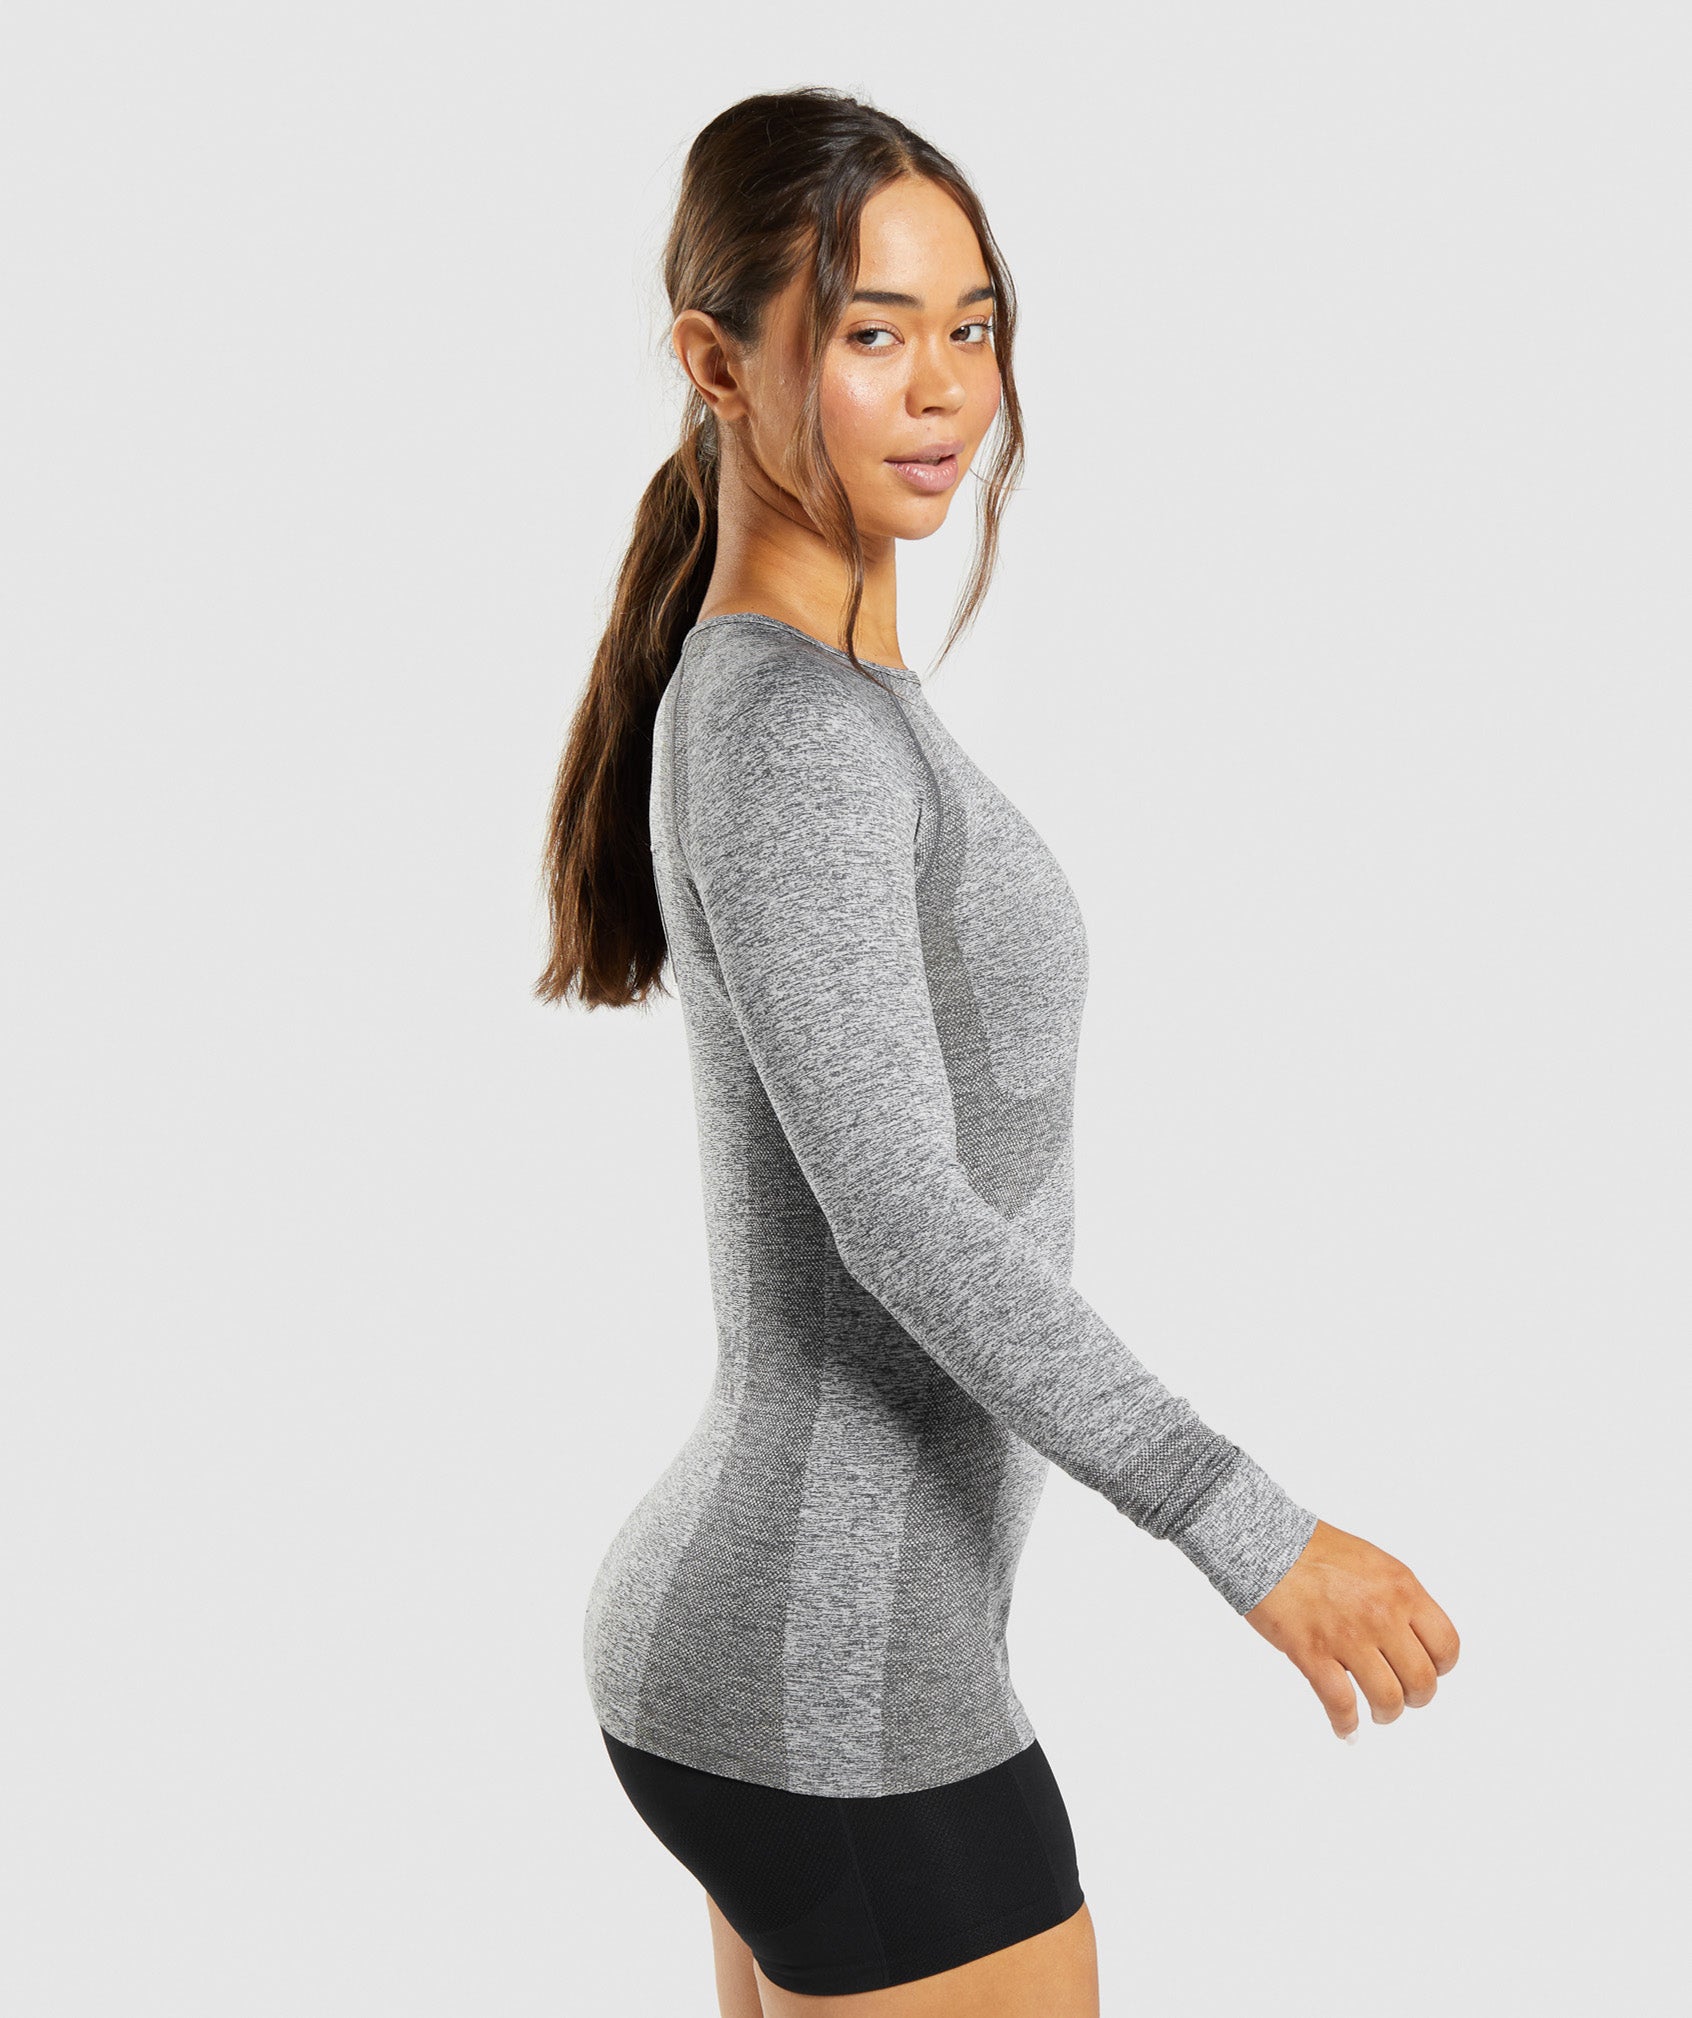 Flex Long Sleeve Top in Charcoal Marl - view 3